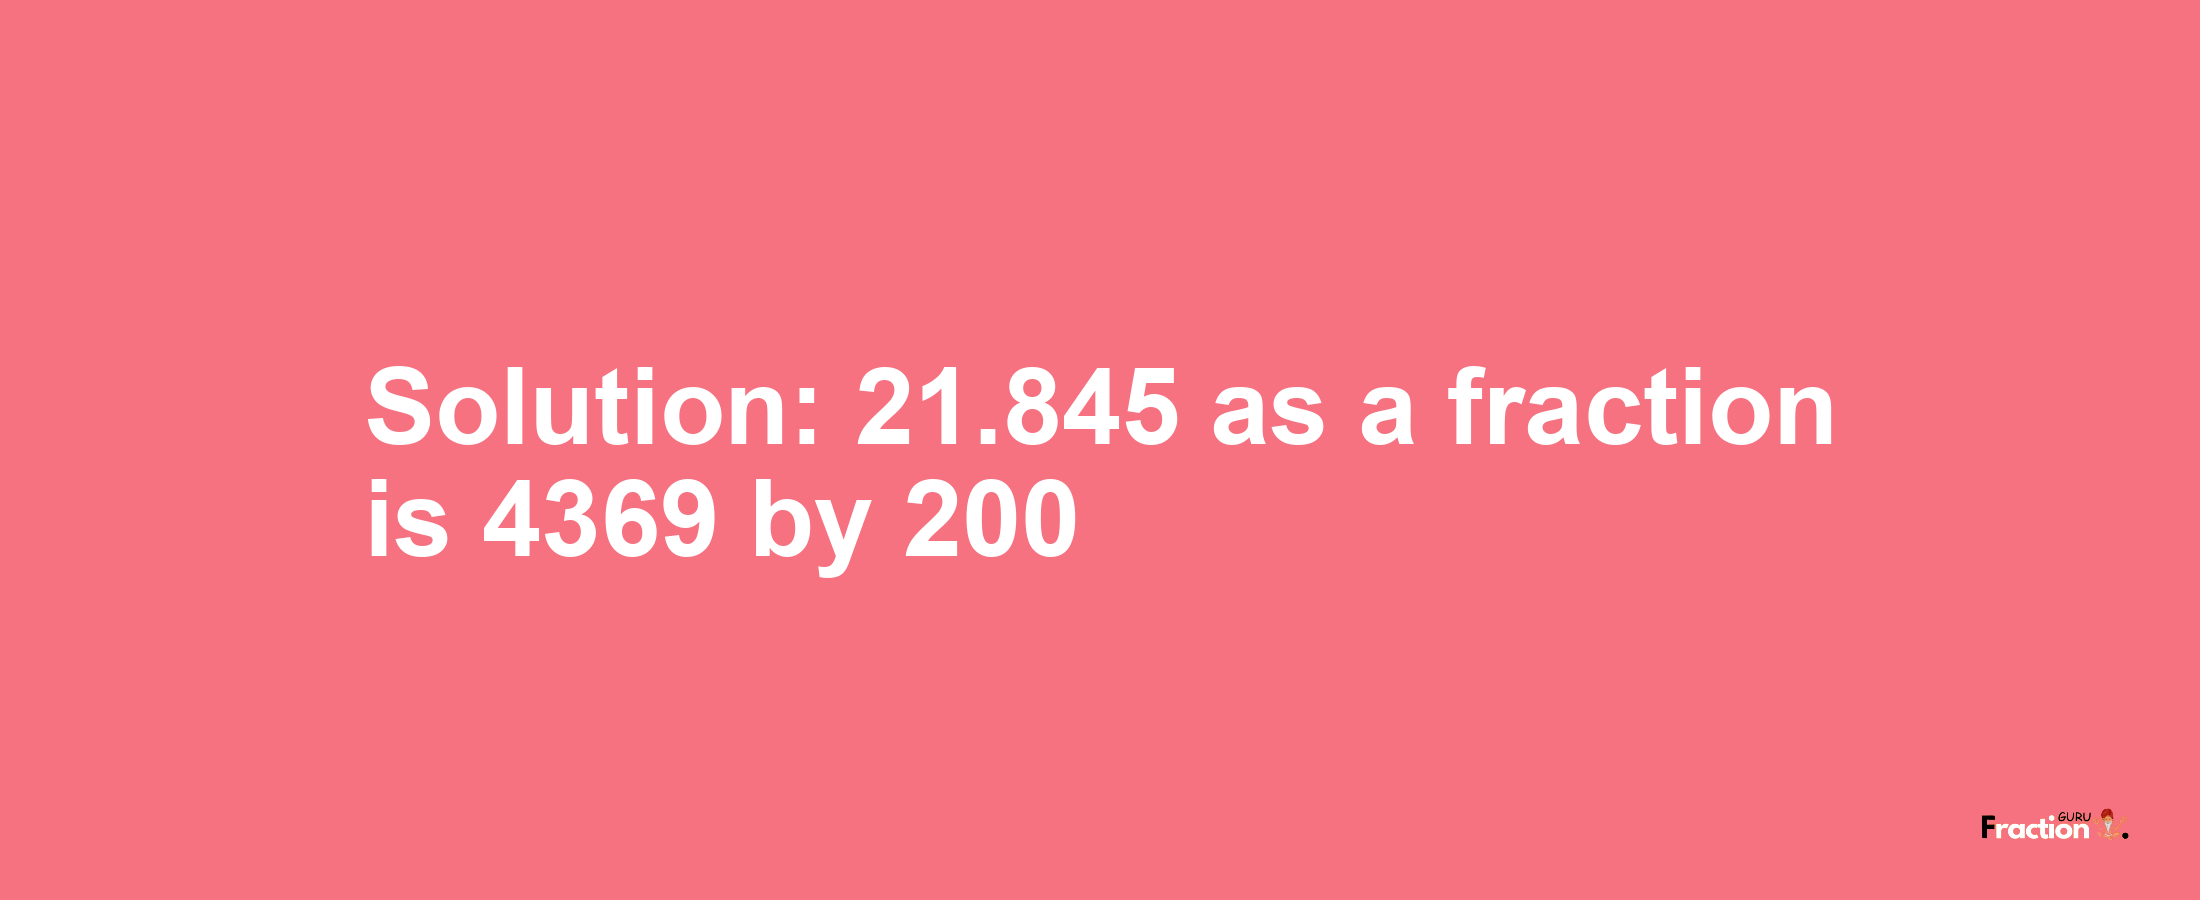 Solution:21.845 as a fraction is 4369/200